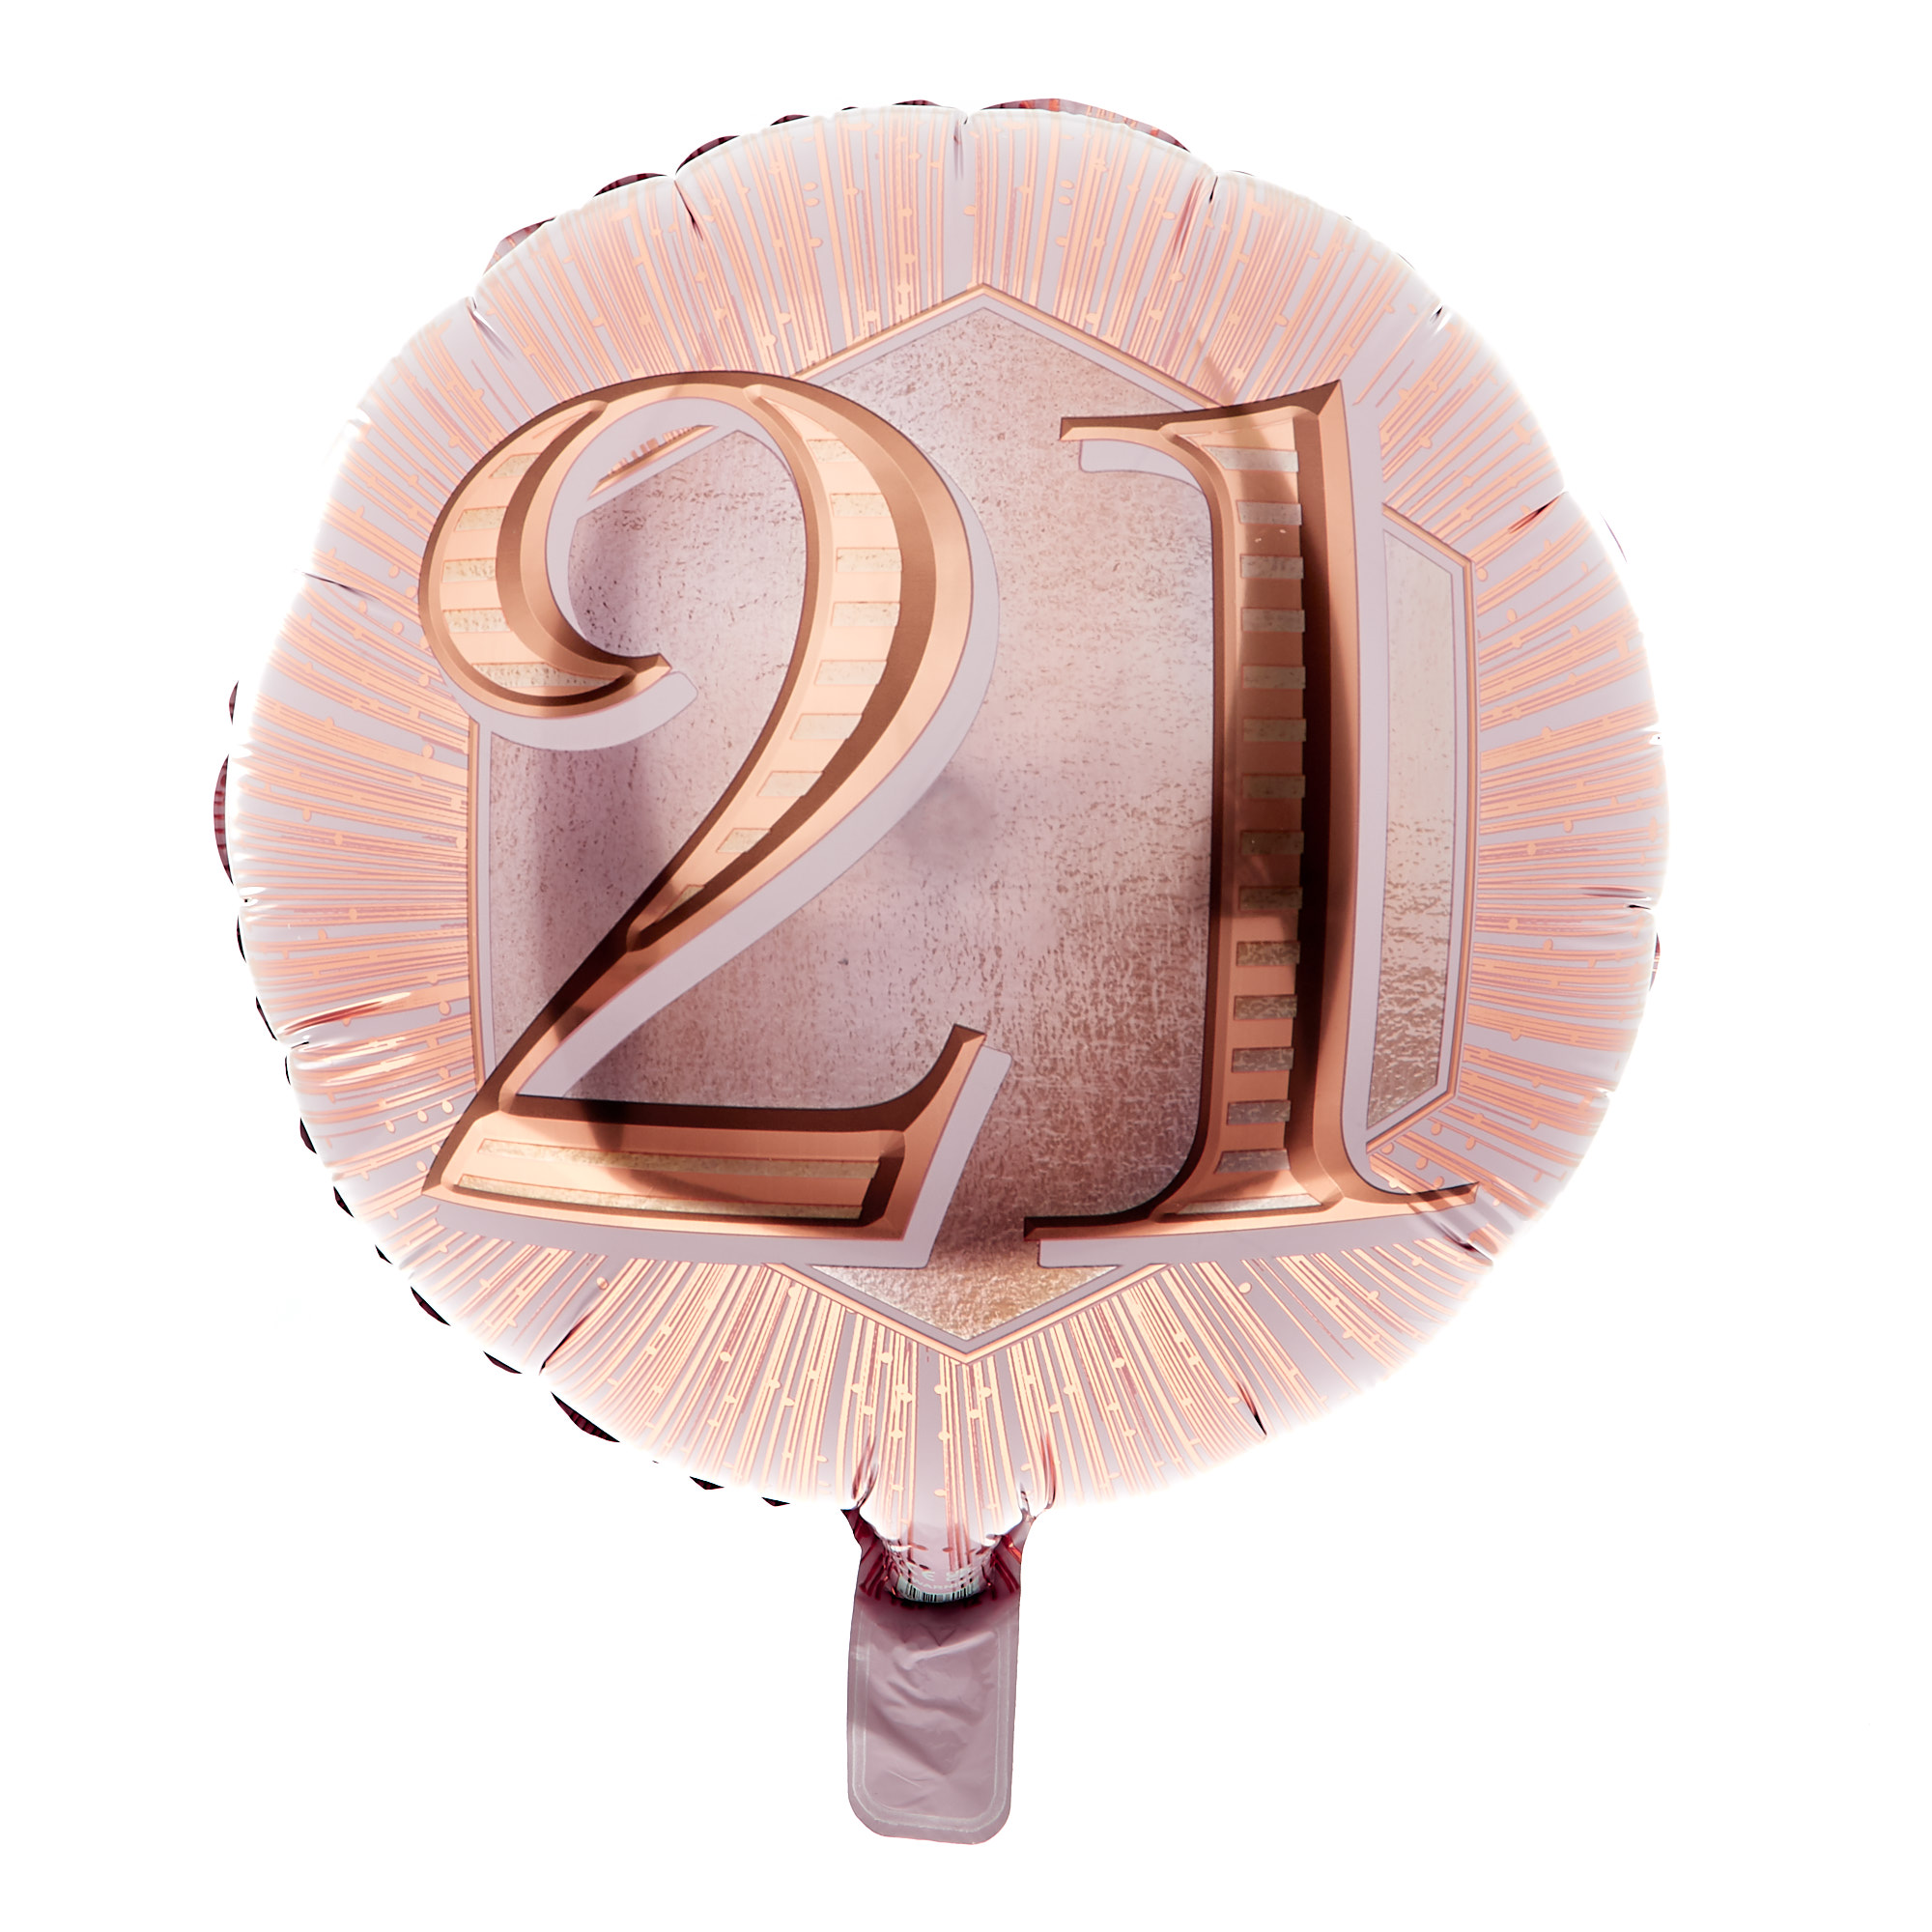 Rose Gold 21st Birthday Balloon Bouquet - DELIVERED INFLATED!